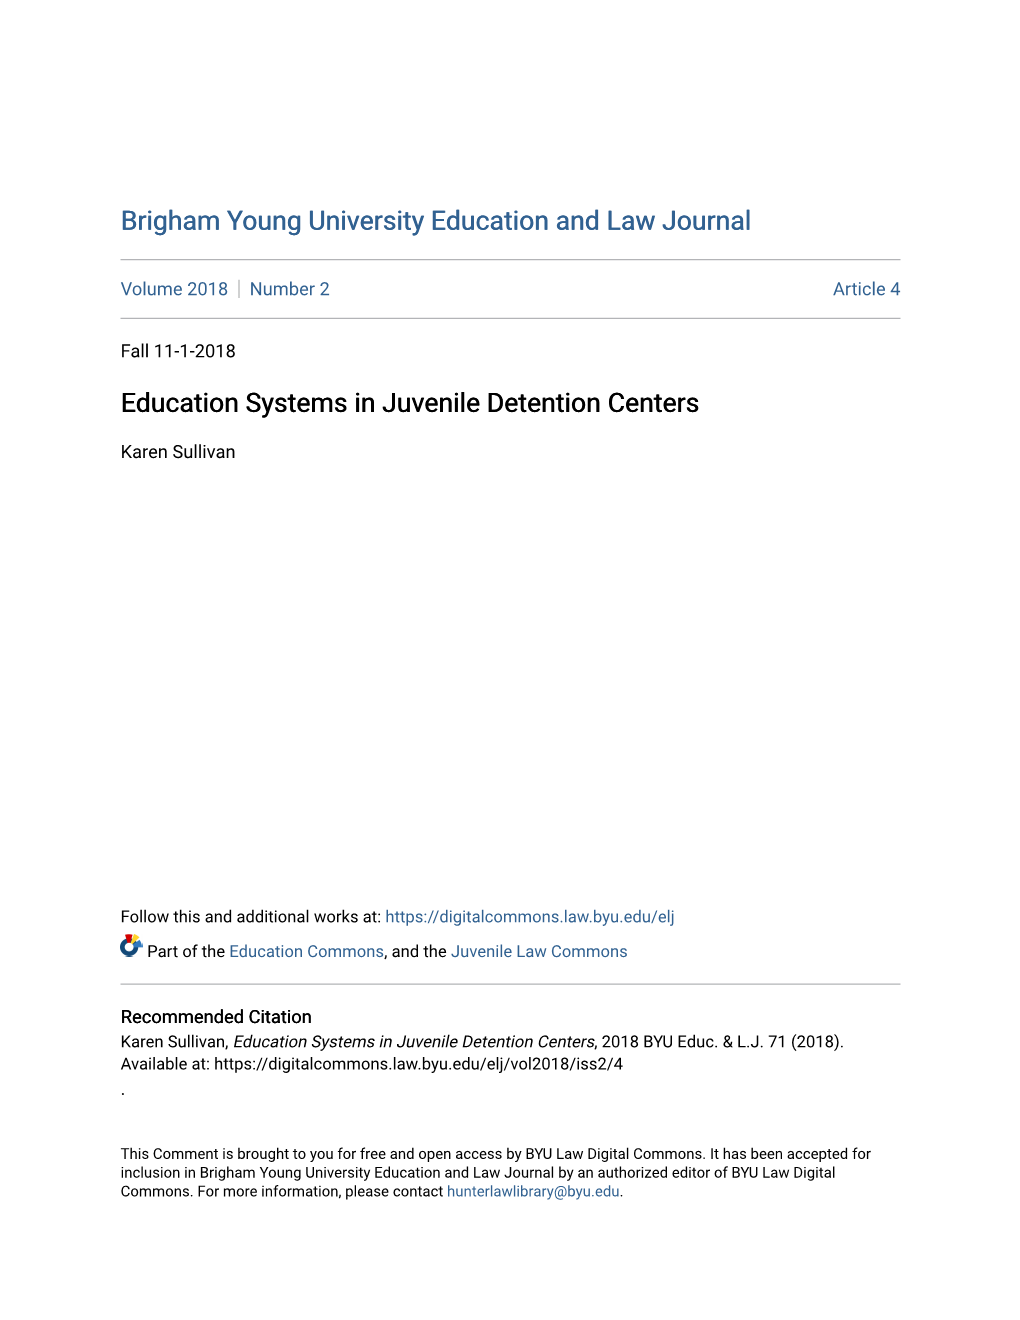 Education Systems in Juvenile Detention Centers